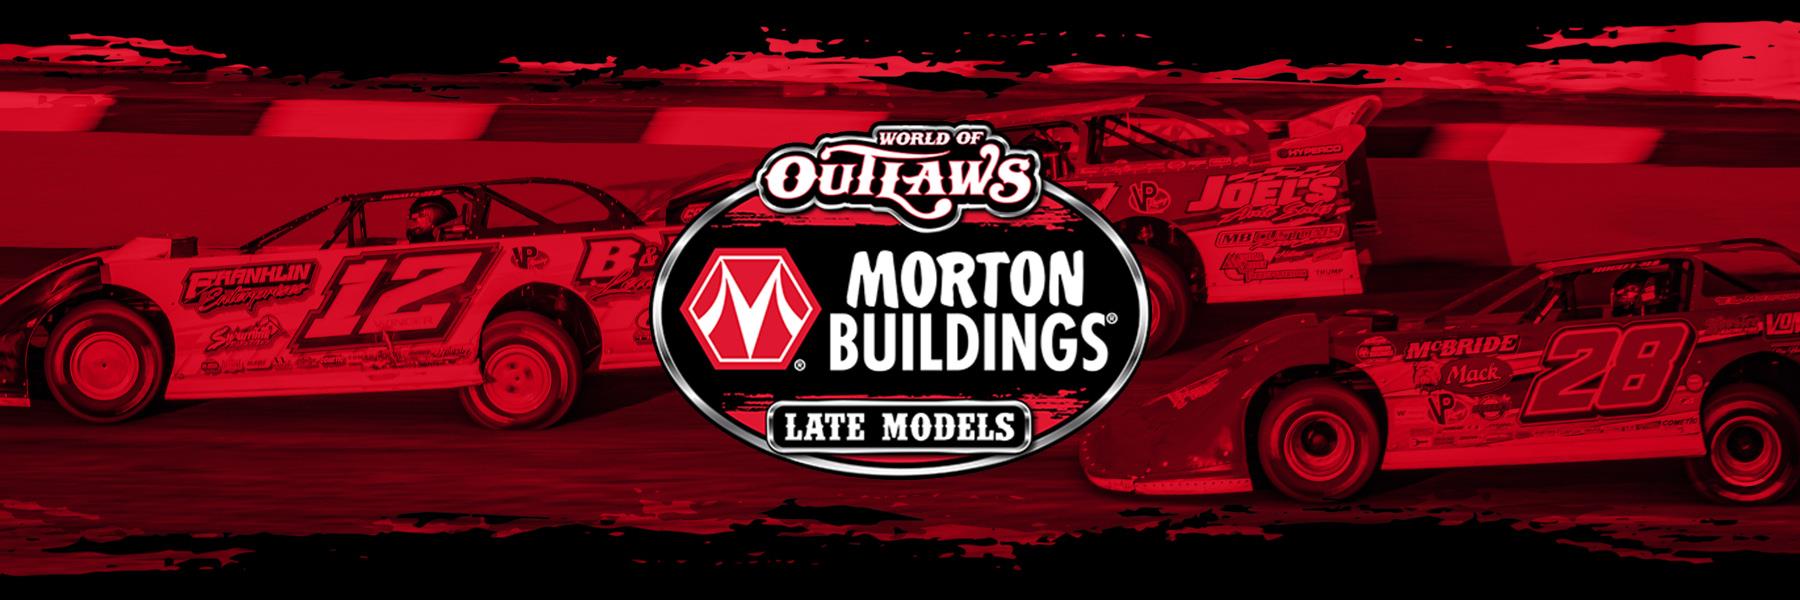 World of Outlaws - Late Models